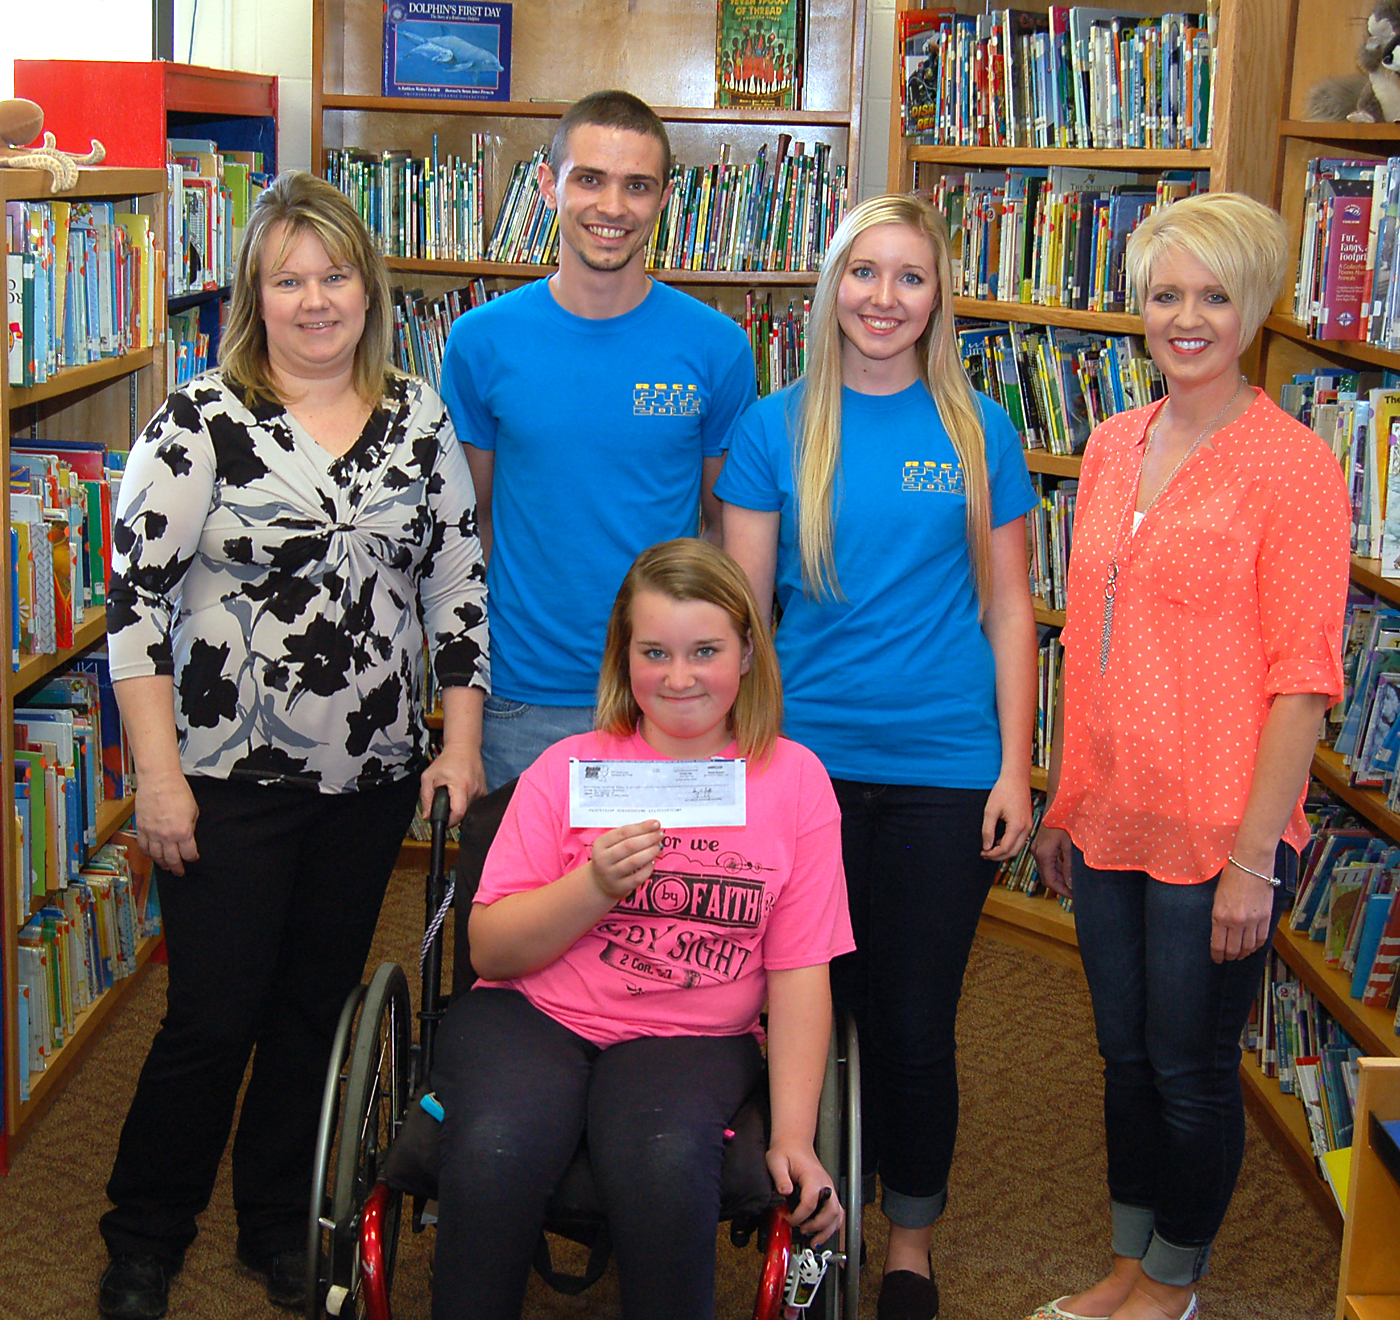 Students in Roane State’s Physical Therapist Assistant Club raised $350 to help the family of Fairview Elementary School student Jerica Stanley (front). Back, from left, are Jerica’s mother, Crystal, Roane State students Andrew Adkins and Savannah Cox, and Fairview Elementary assistant principal Gretchen Stephens.